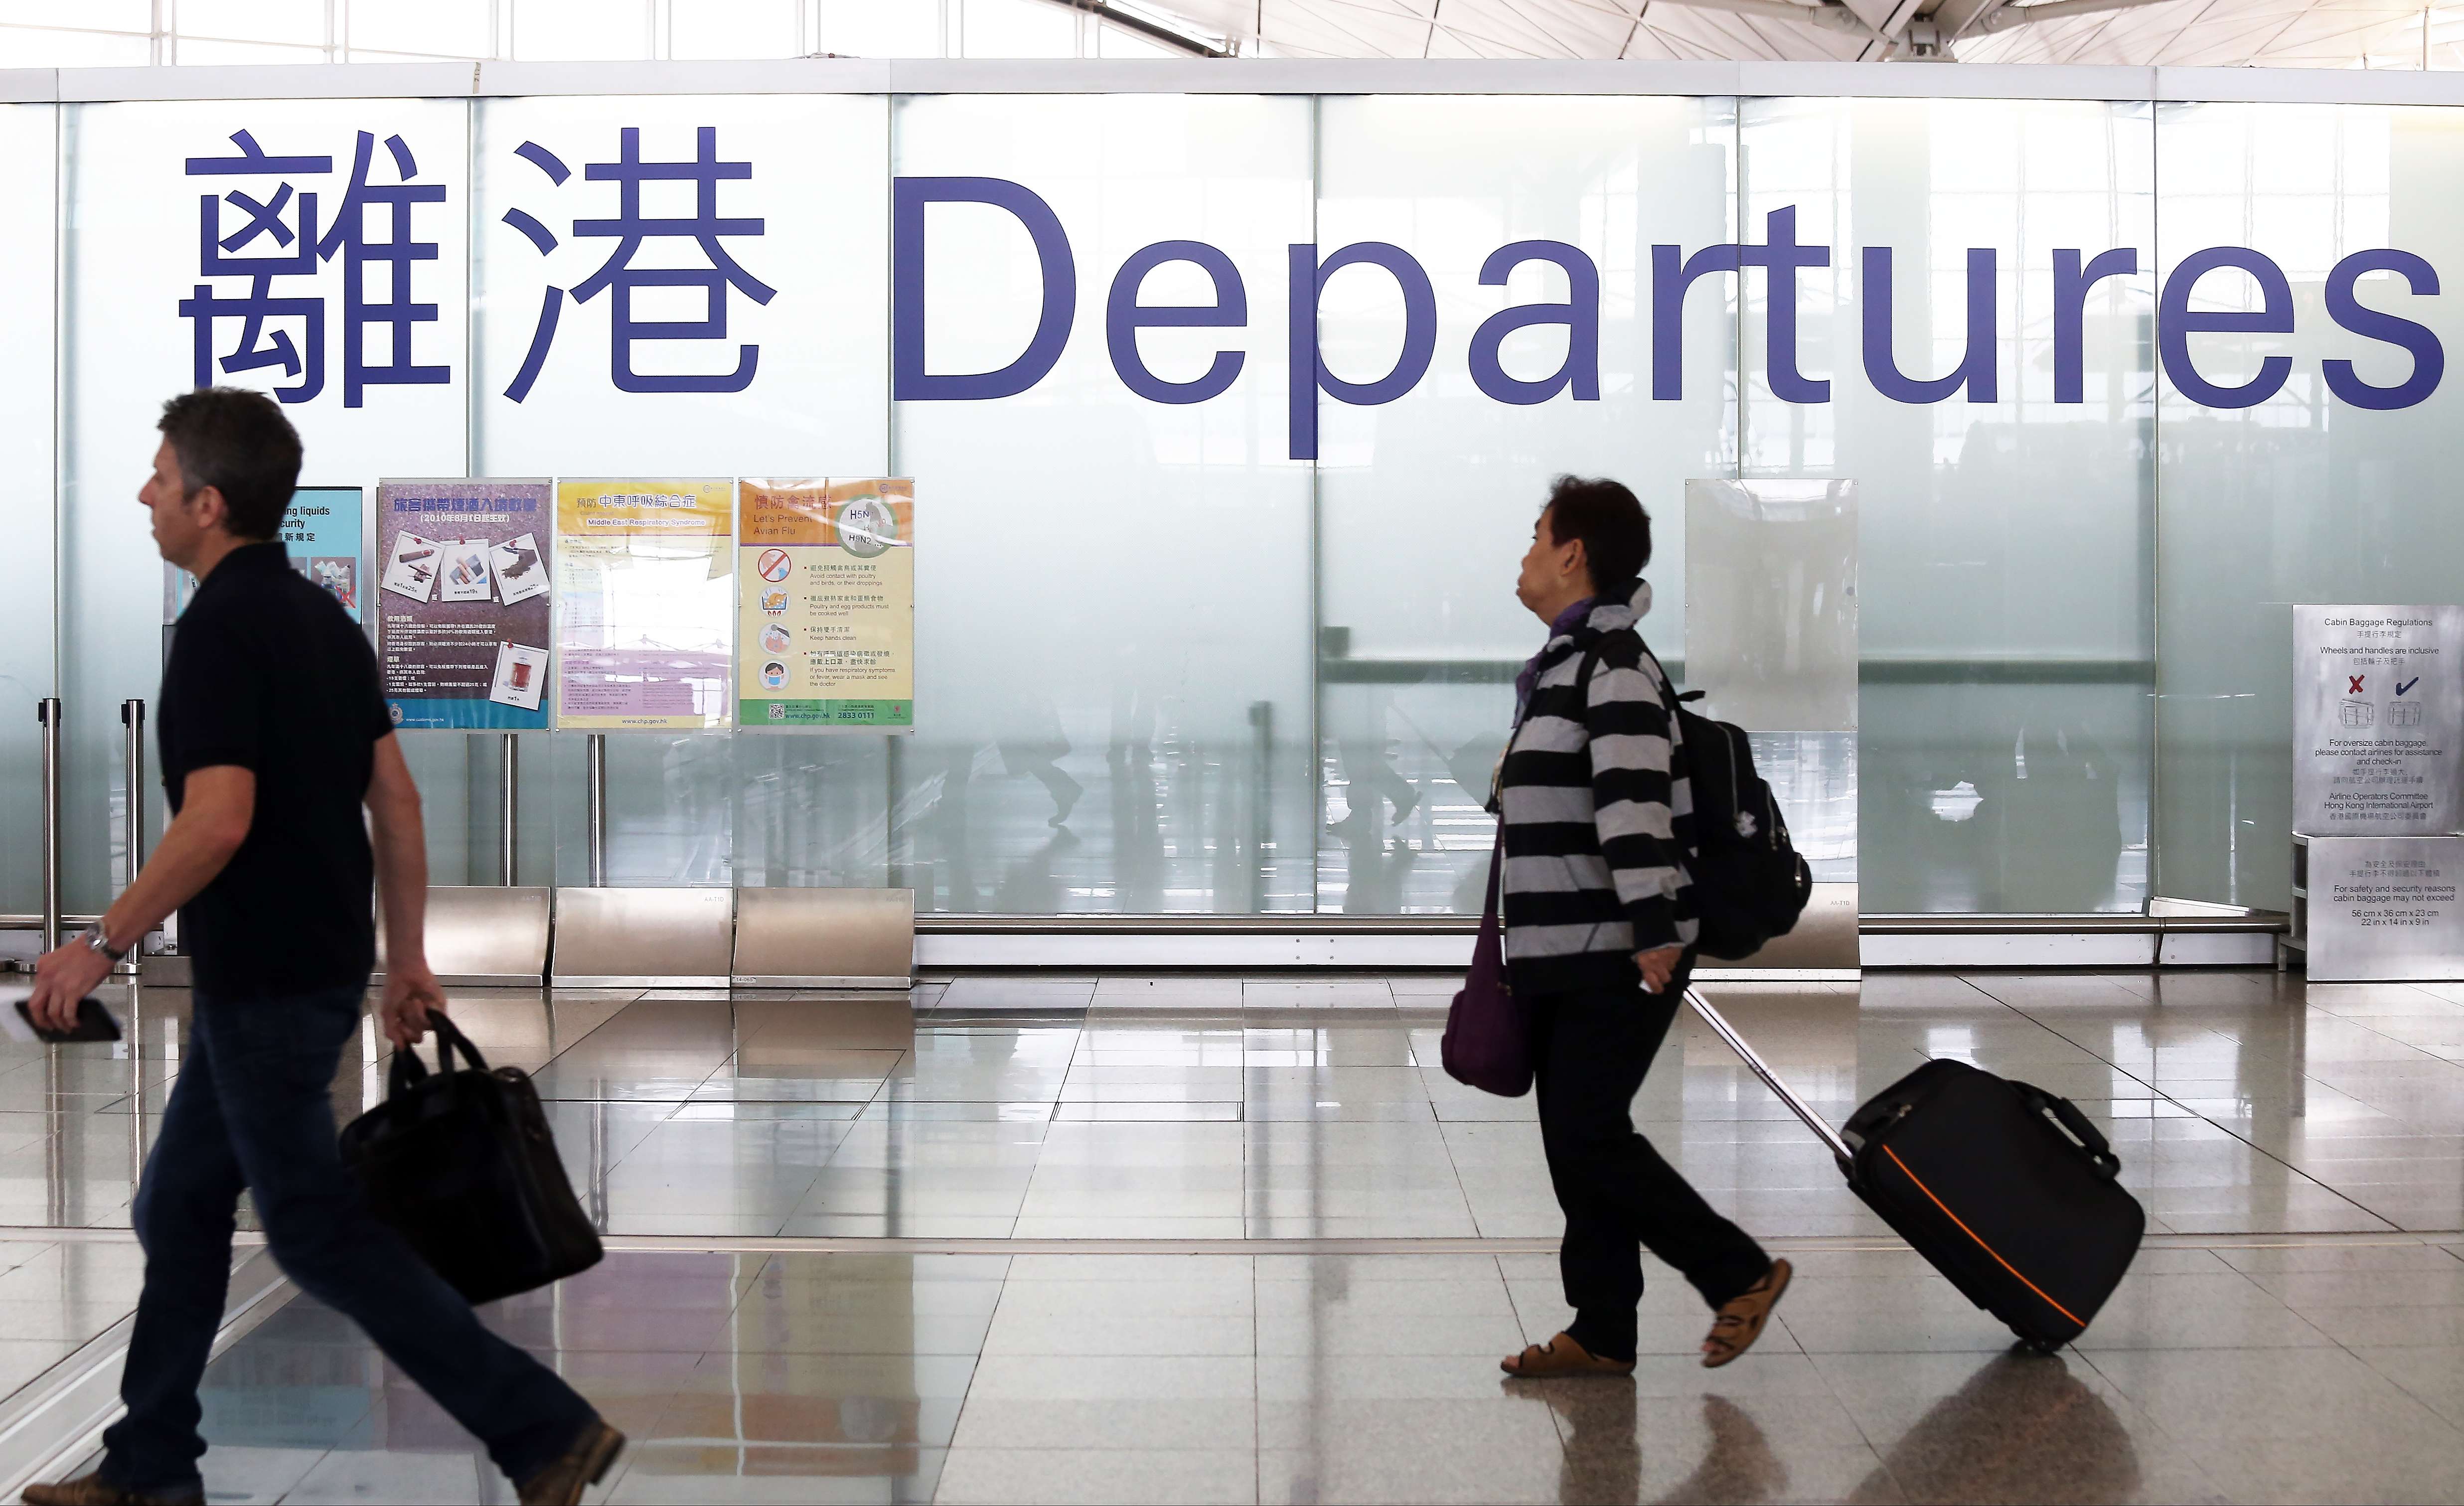 Leung Chun-ying denies exerting pressure on the Hong Kong airport staff to bypass security rules to deliver the piece ofleft luggage, which his younger daughter had left behind, to her at the boarding gateat the time. Photo: Dickson Lee